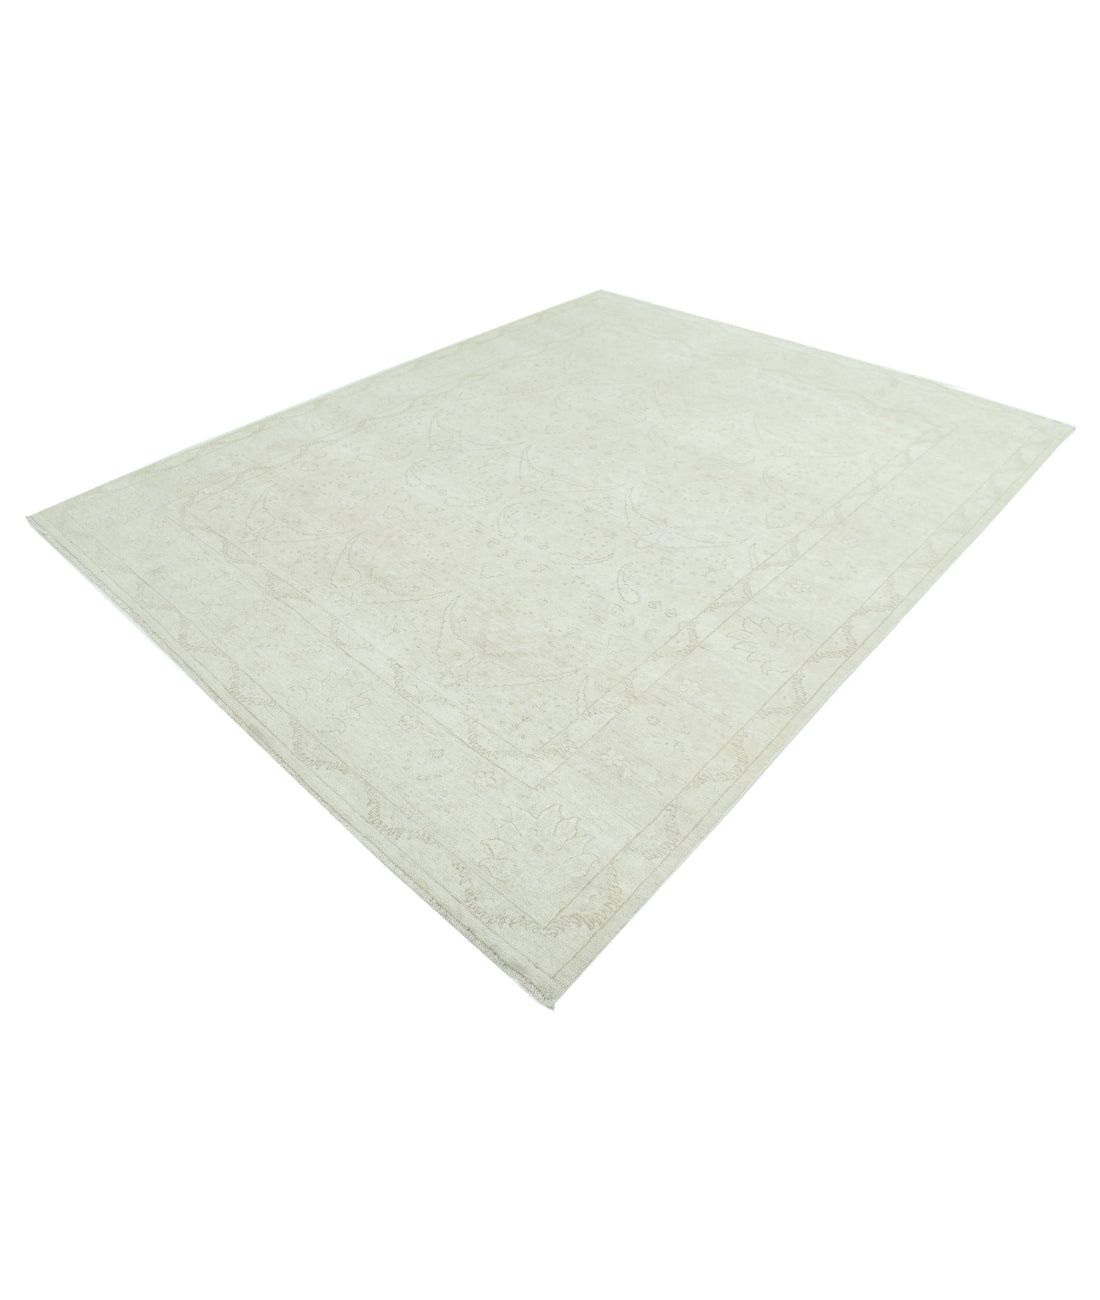 Hand Knotted Serenity Wool Rug - 7'9'' x 9'9'' 7'9'' x 9'9'' (233 X 293) / Ivory / Ivory